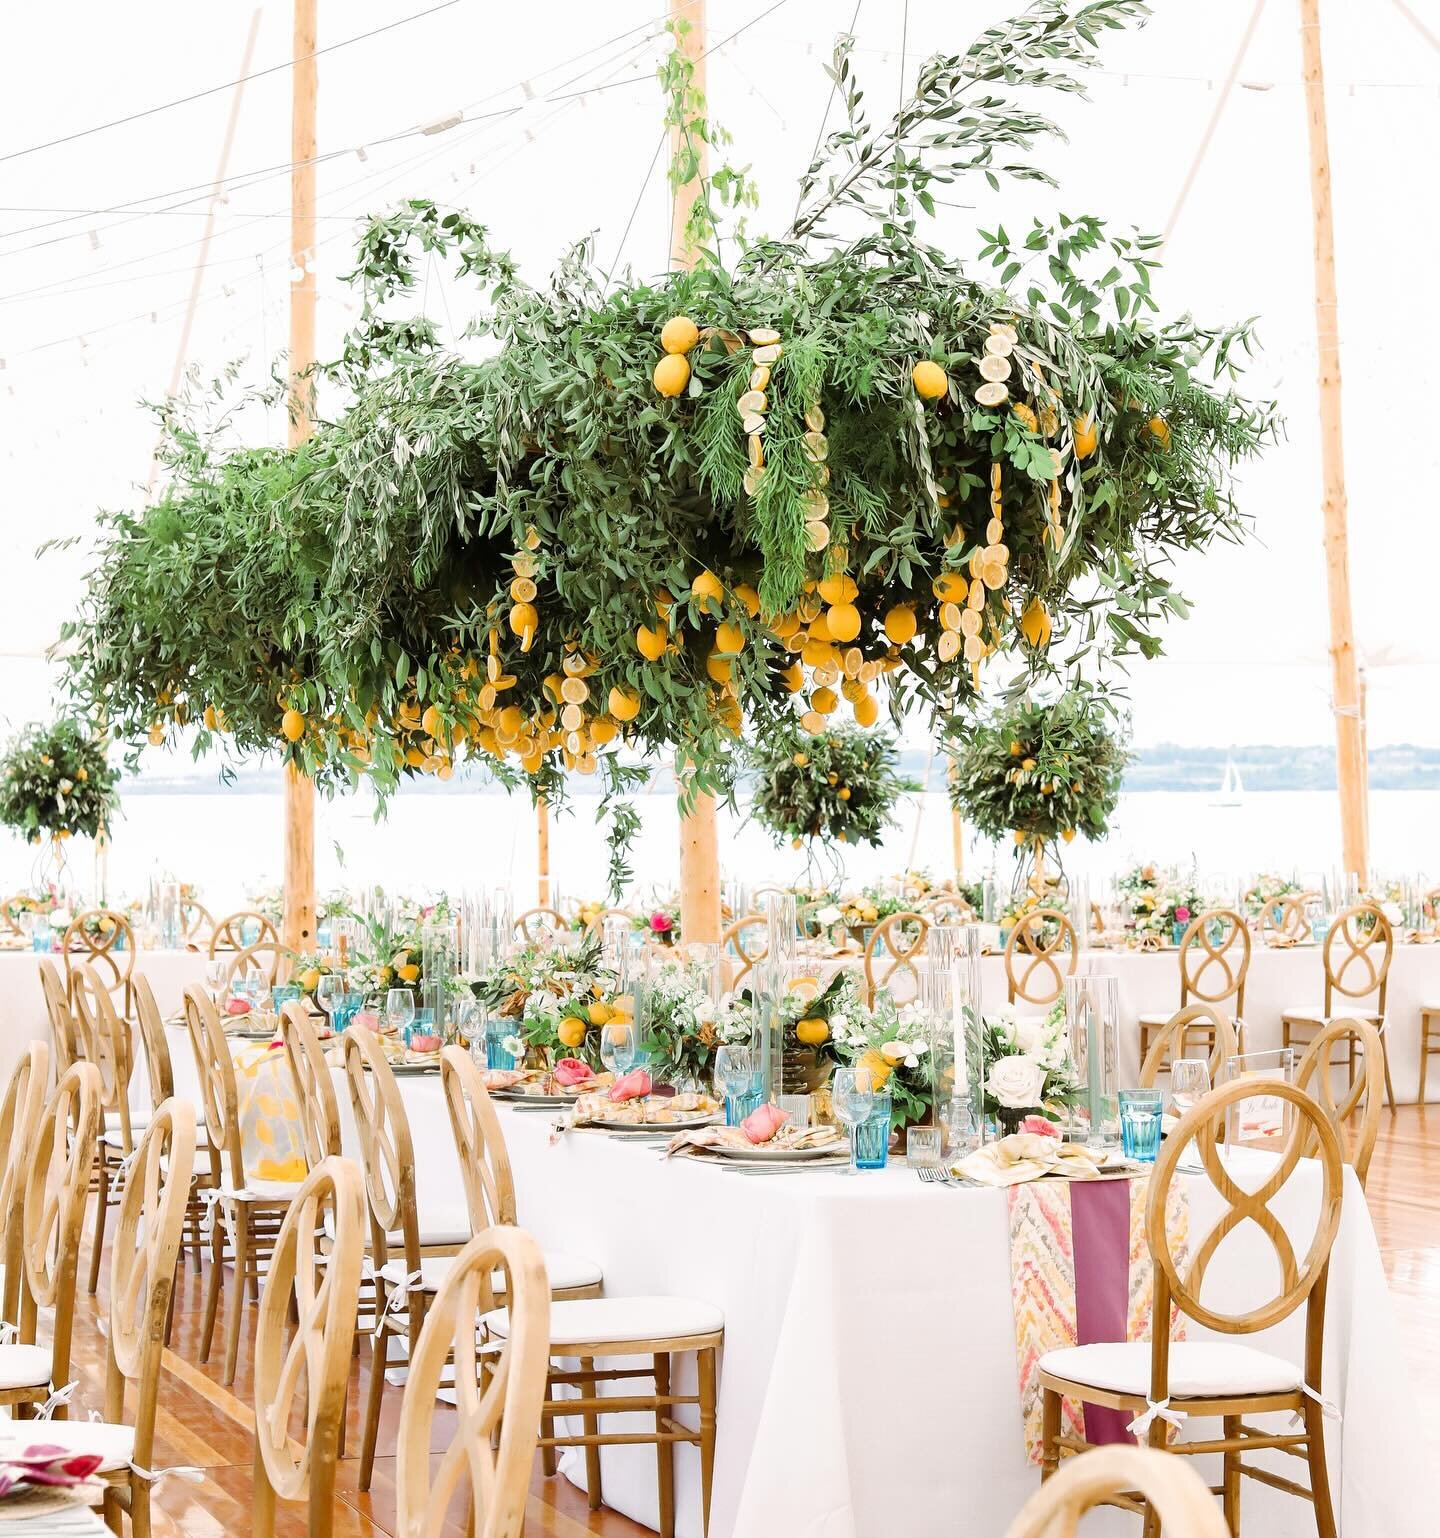 When life hands you🍋🍋&hellip;throw a really fabulous party! 

Planning + Design // @exquisiteeventsplanning 
Decor + Lighting // @ryandesignsri 
Florals // @stoneblossom 
Rentals // @peakeventservices @truenortheventrentals 
Catering // @morinscate